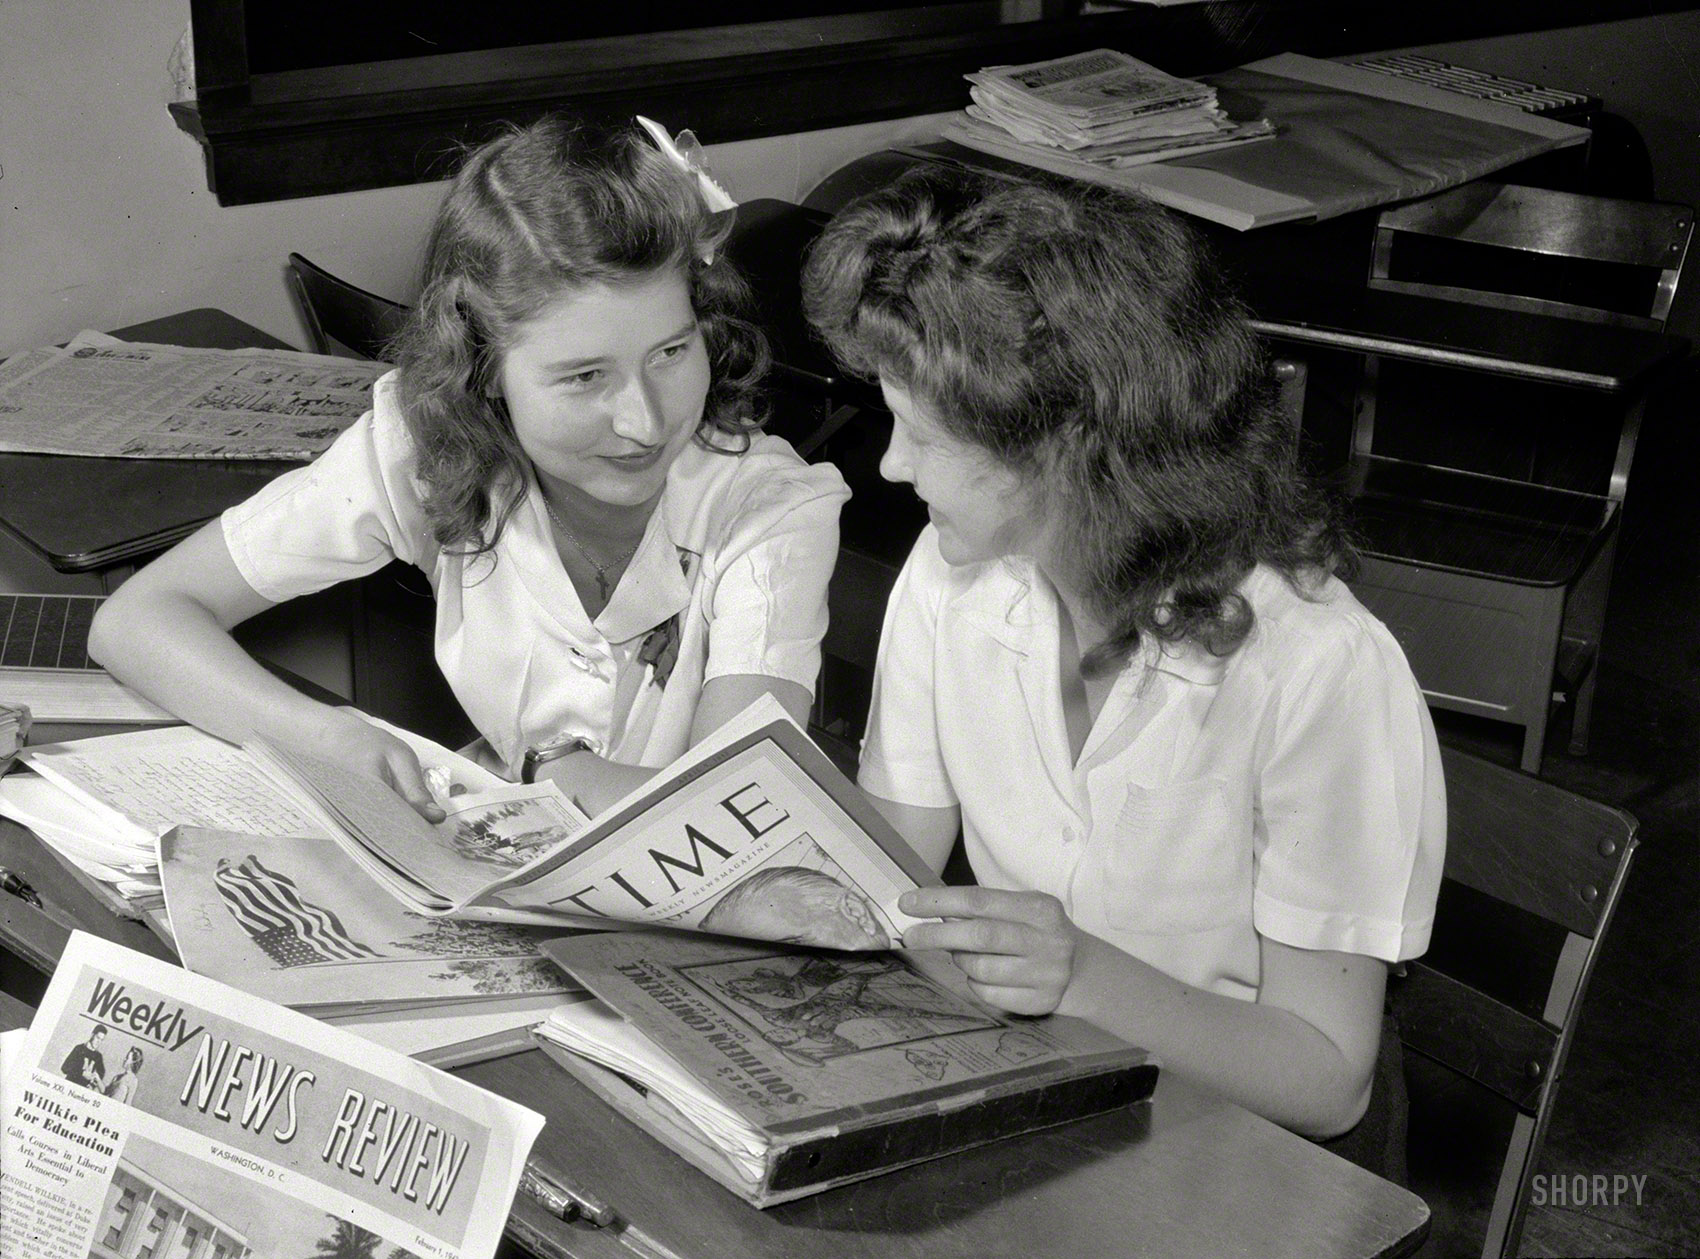 Spring 1943. "Keysville, Virginia. Randolph Henry High School. Social studies class. Students study in groups of six or eight, each group picking own subject." Photo by Philip Bonn for the Office of War Information. View full size.